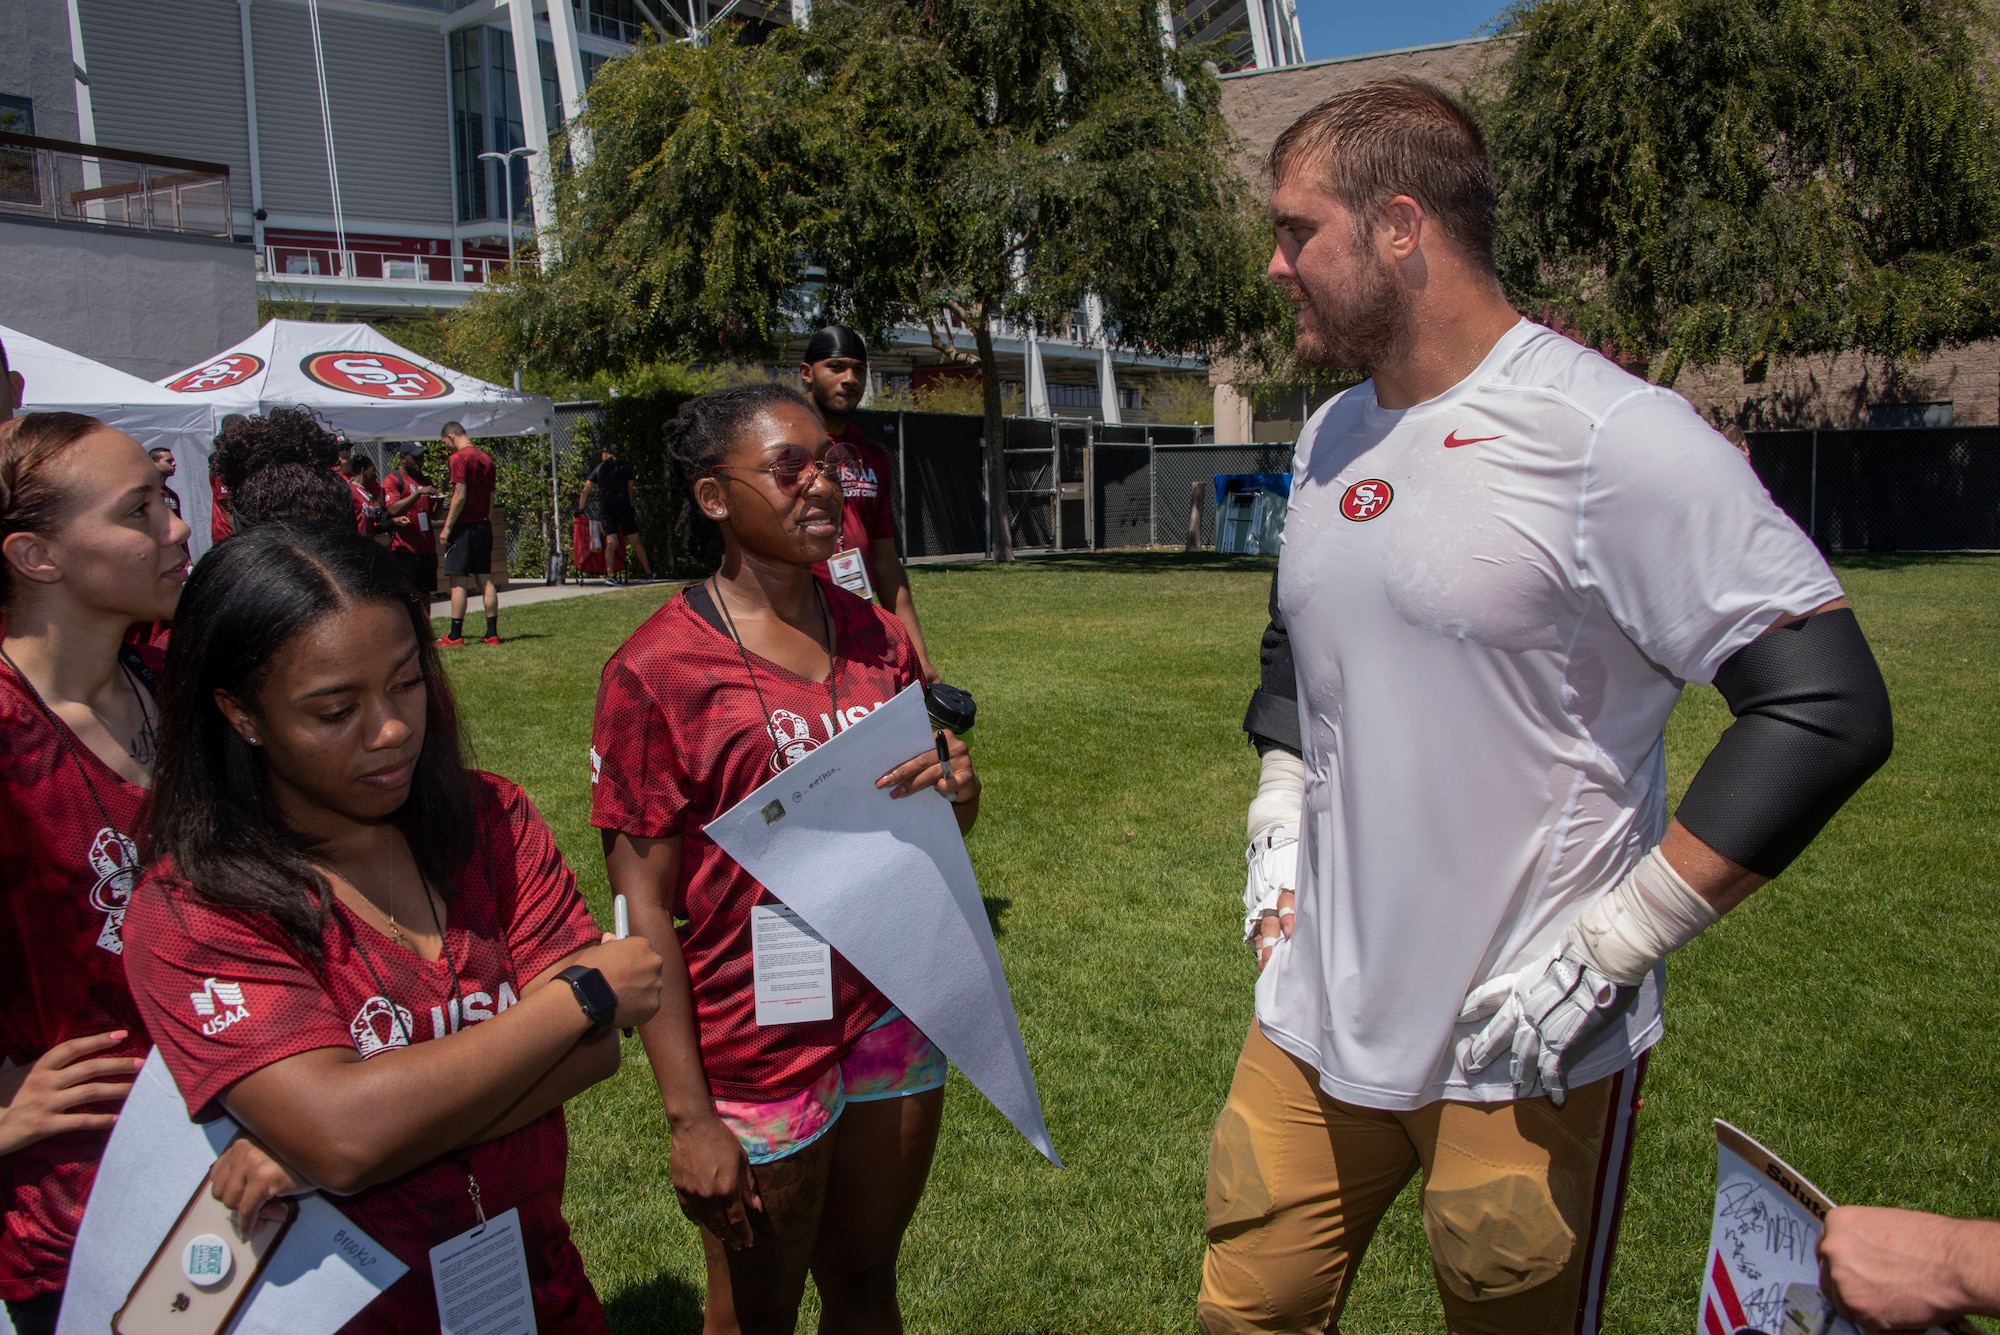 San Francisco 49ers offensive lineman Ben Garland meets with Airmen from Travis Air Force Base, California, Aug. 13, 2019, during the Salute to Service Boot Camp event in Santa Clara, California. The event provided Airmen with an opportunity to interact with NFL players and compete against one another in a variety of athletic drills. (U.S. Air Force photo by Tech. Sgt. James Hodgman)